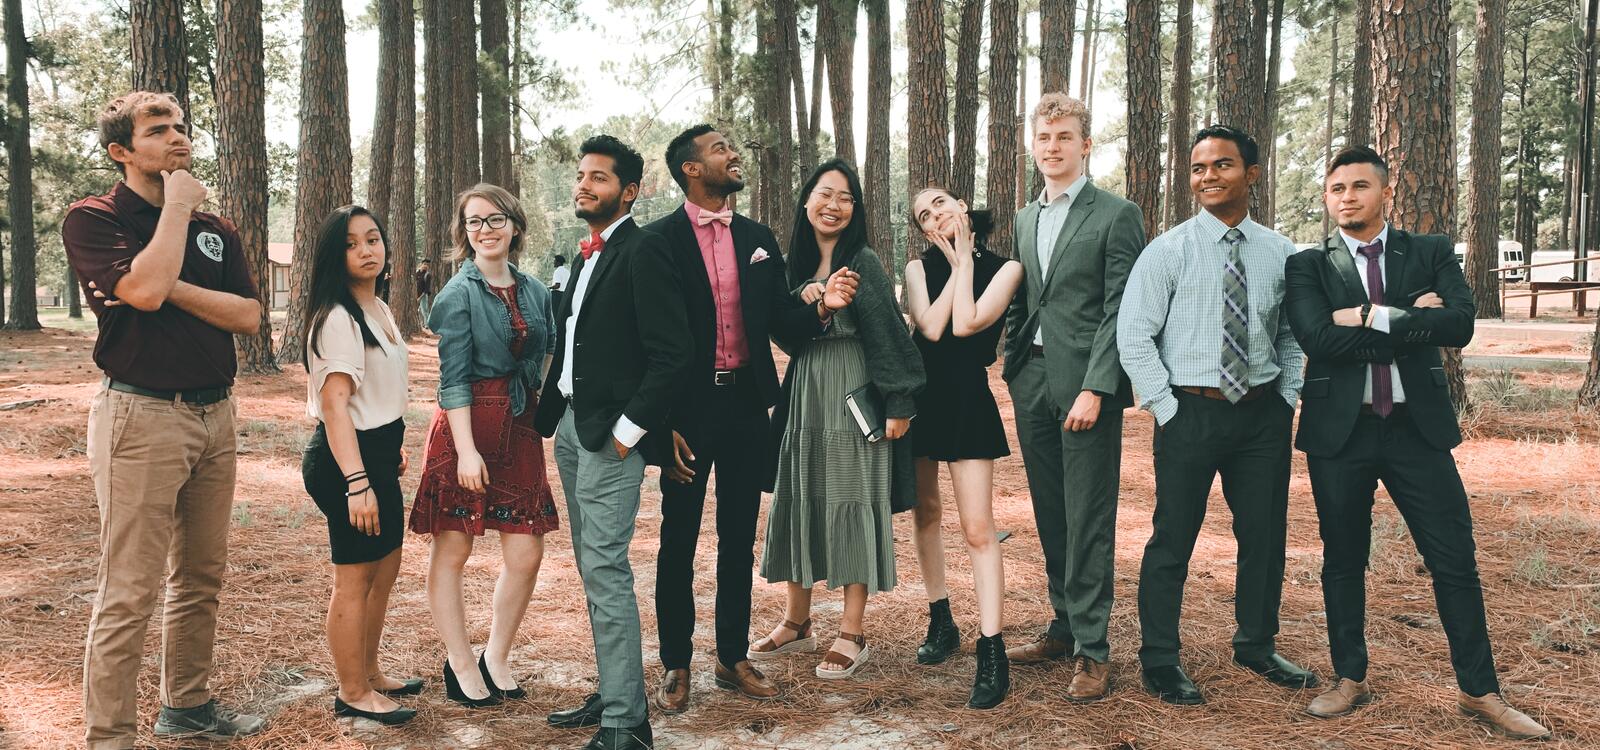 A group of students, all dressed in church clothes, smile and stand in different poses together